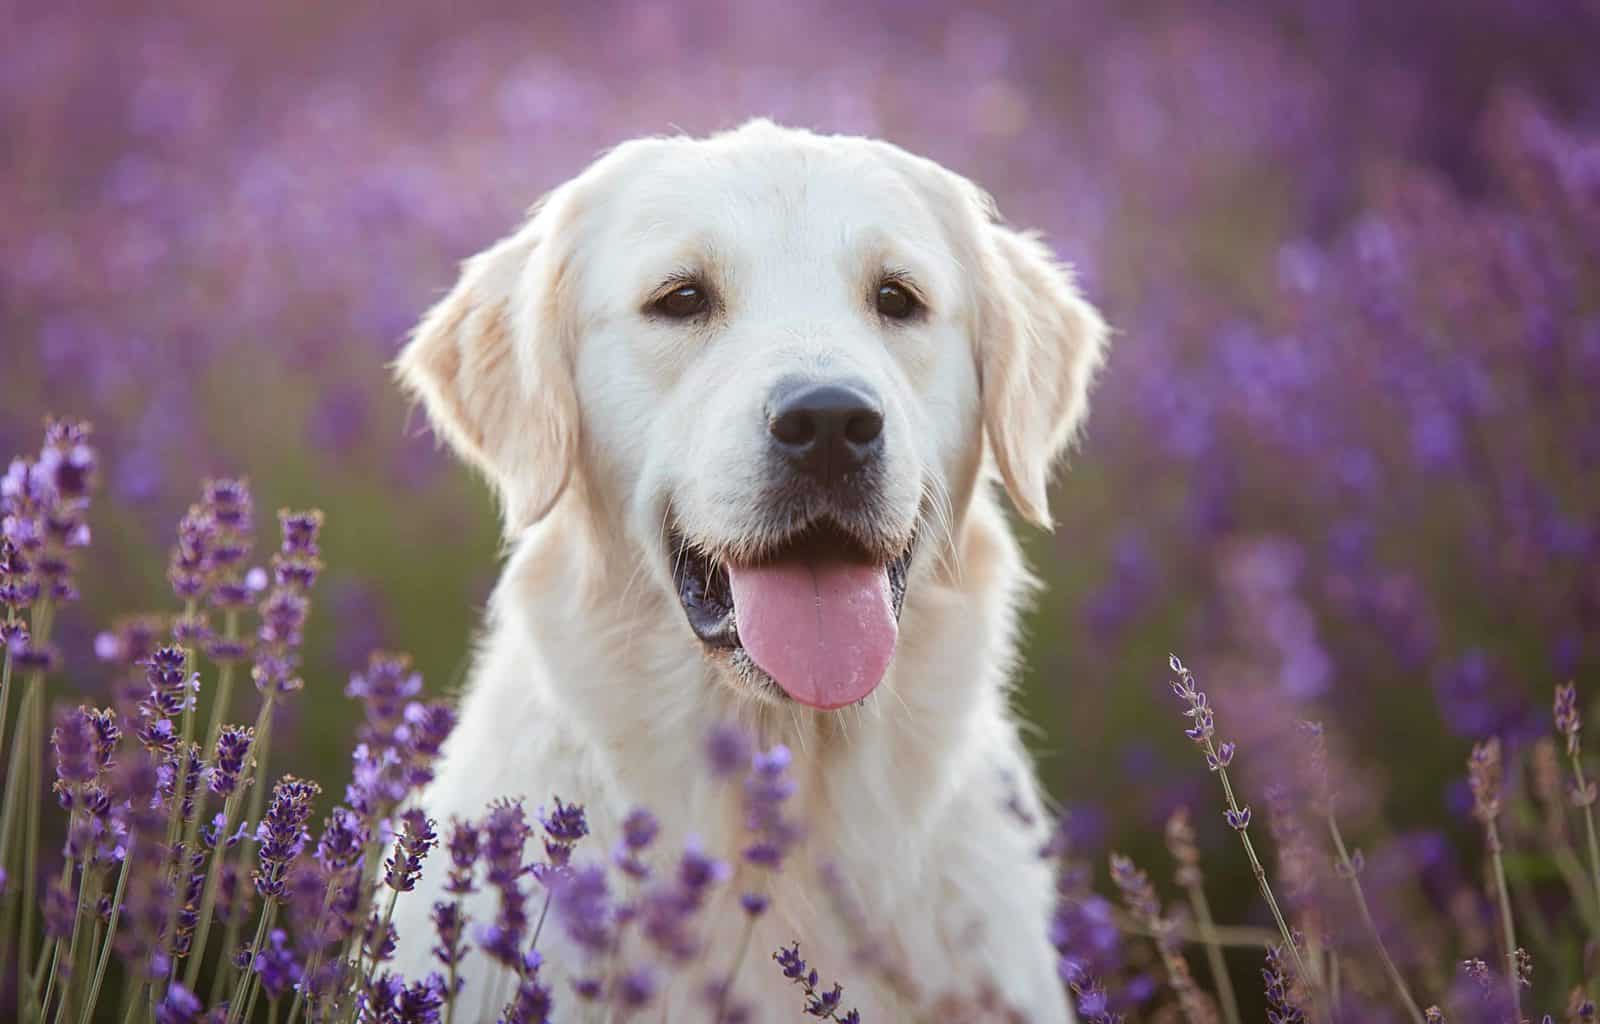 Happy golden retriever sits outside in purple flowers. Mistakes that shorten your dog's lifespan include skipping vet visits, failing to keep up with vaccines, not feeding your dog a healthy diet.